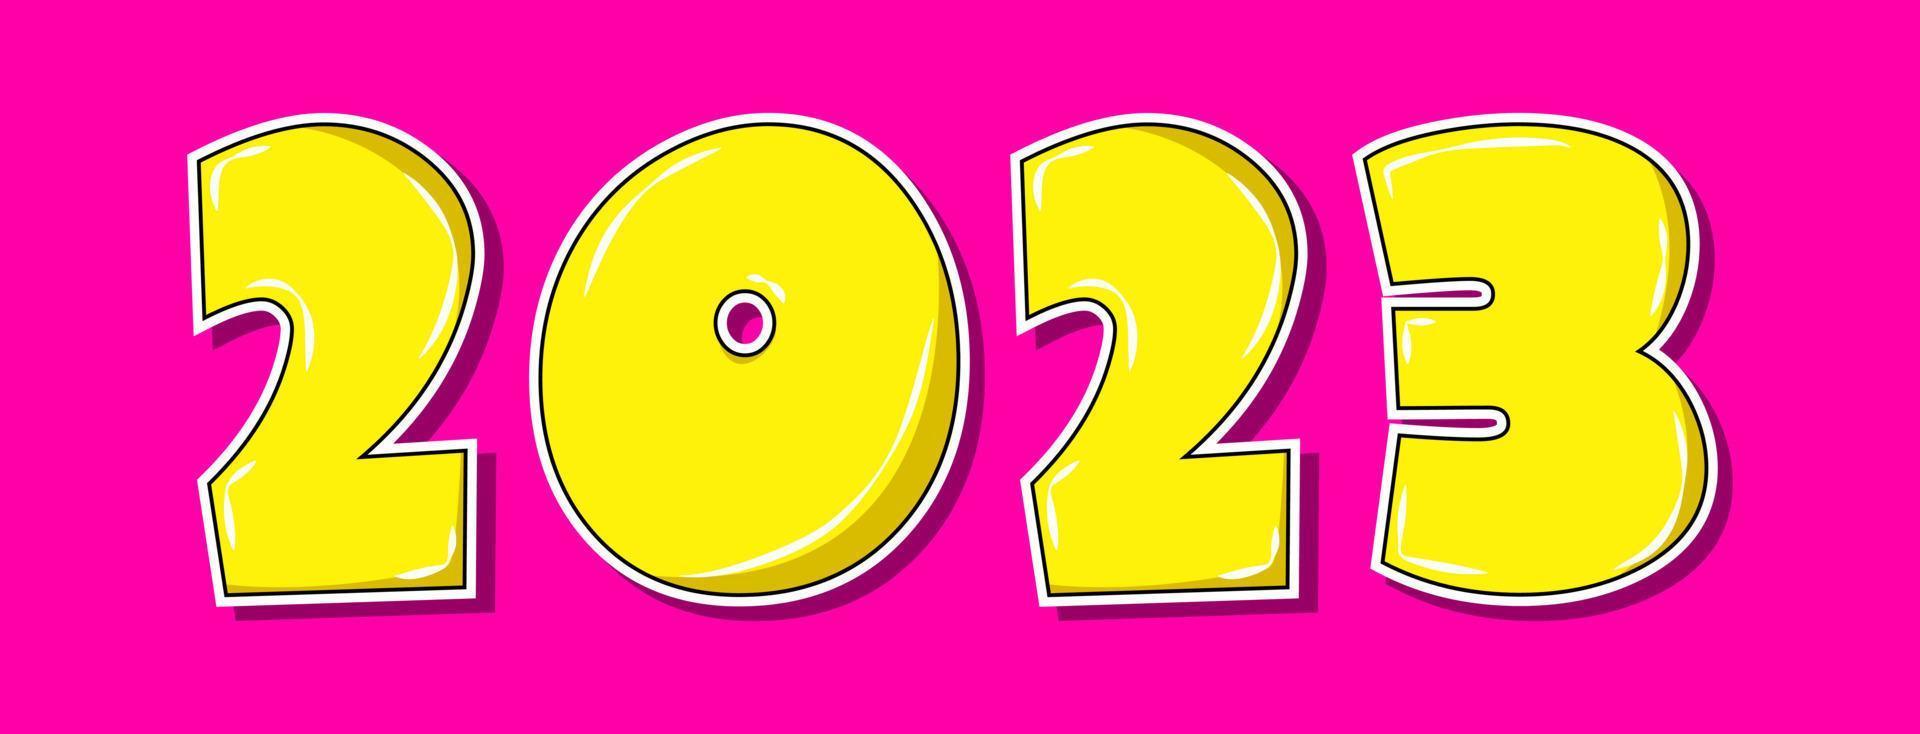 Pop art style yellow 2023 year on pink background vector